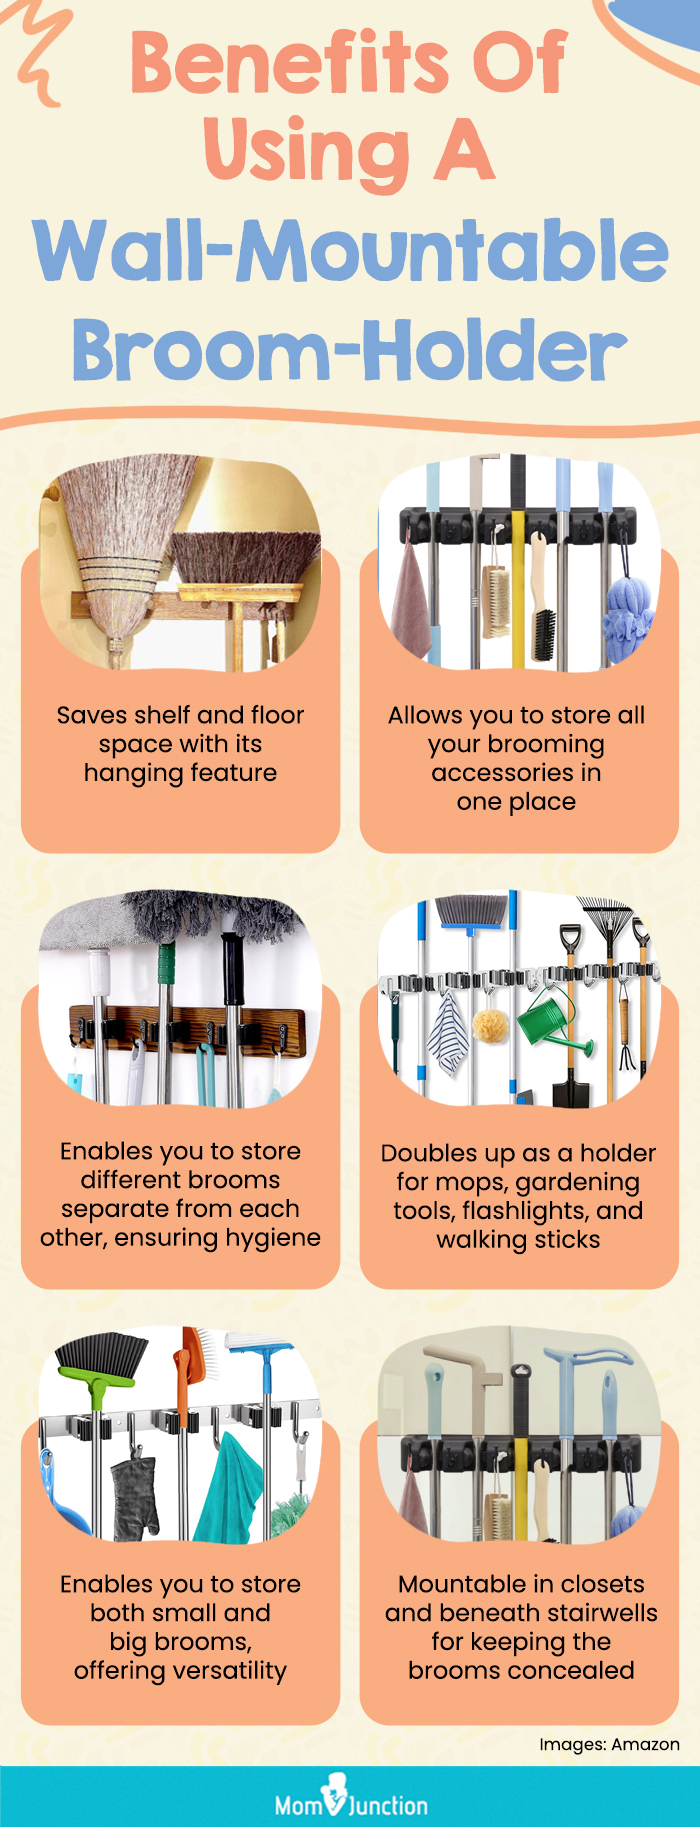 Benefits Of Using A Wall Mountable Broom Holder(infographic)